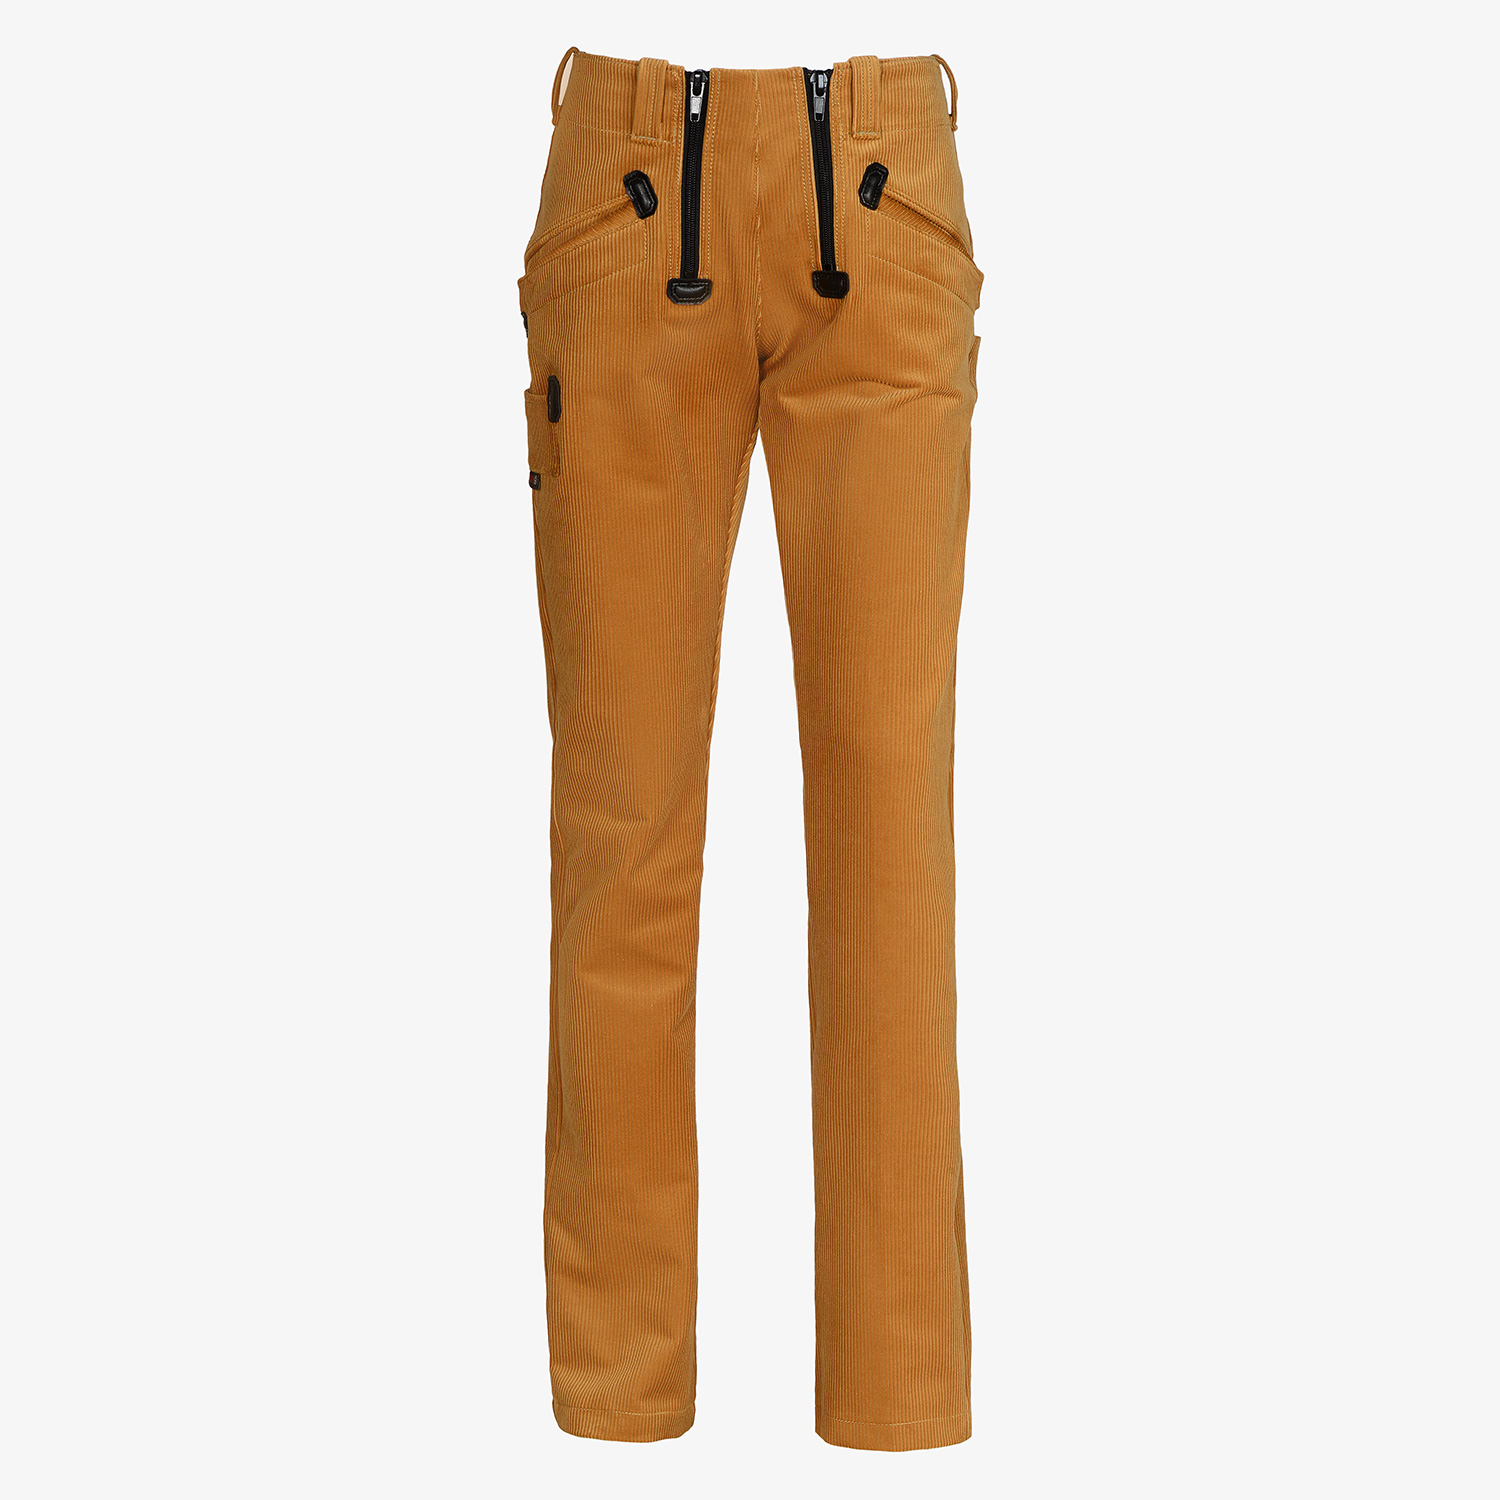 BELLA guild trousers corduroy with spandex